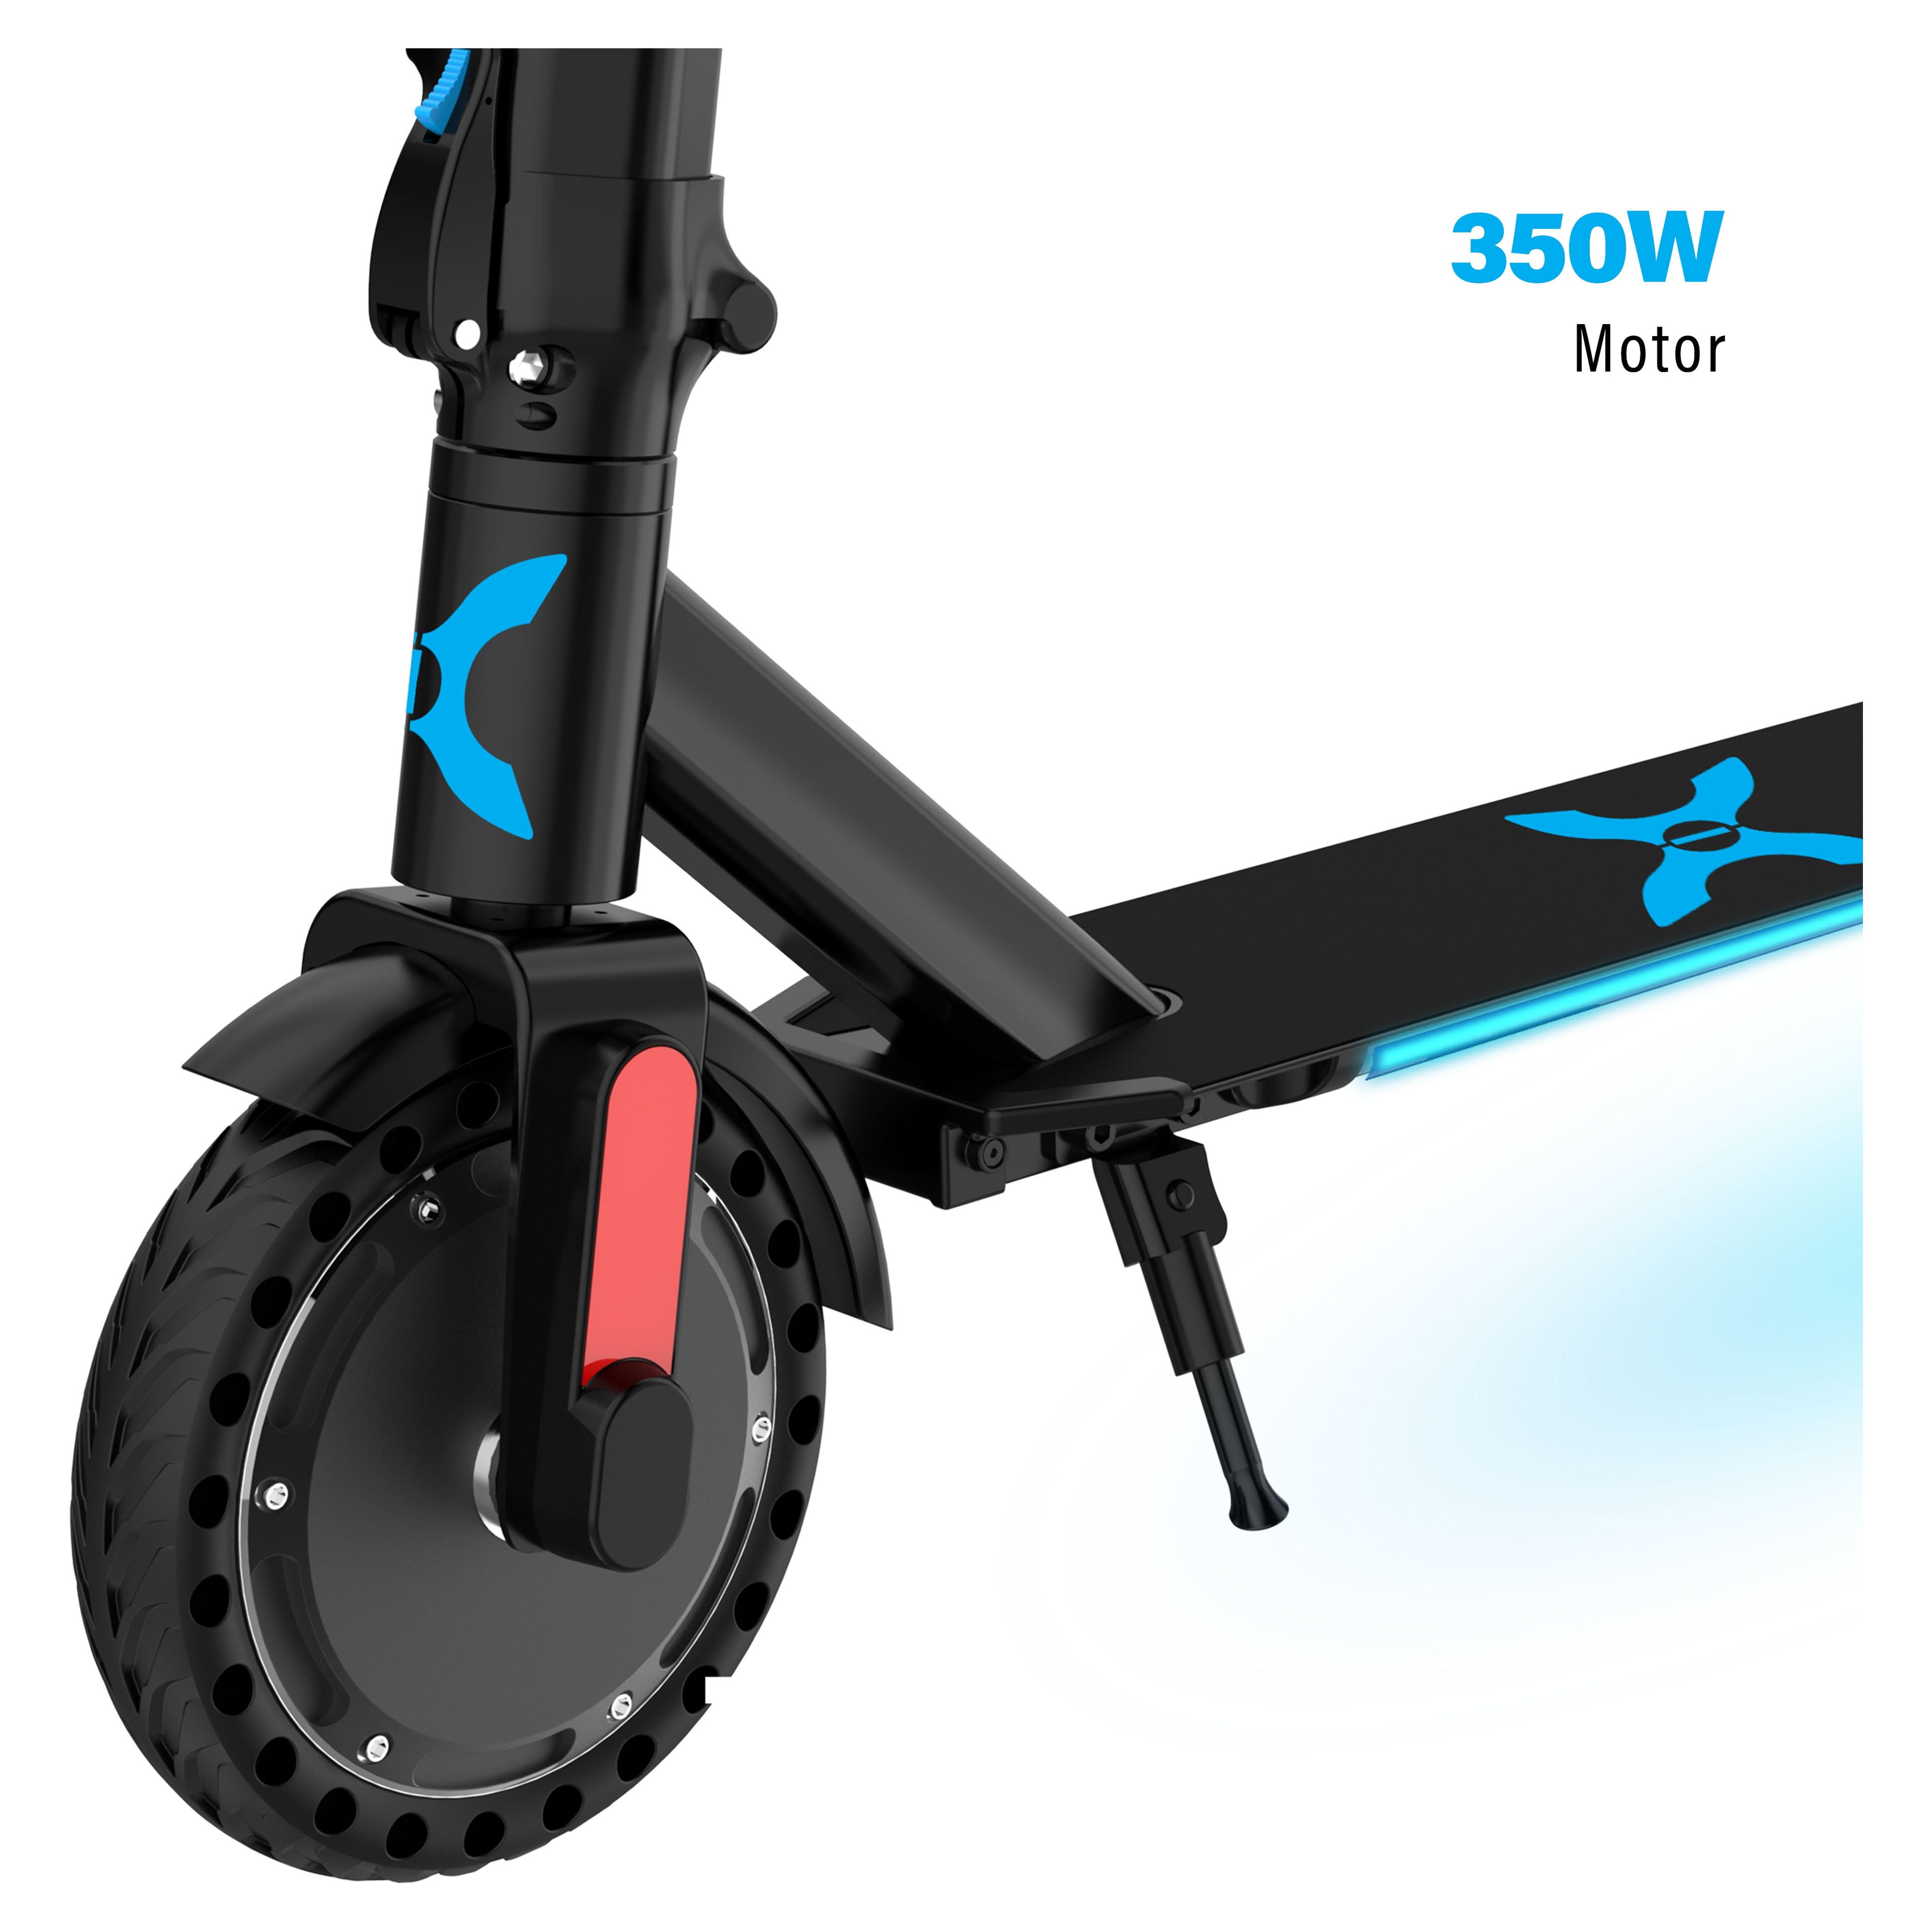 Hover-1 Eagle Electric Folding Scooter for Adults,15 mph Max Speed, LED Headlight, UL 2272 Certified - image 5 of 14